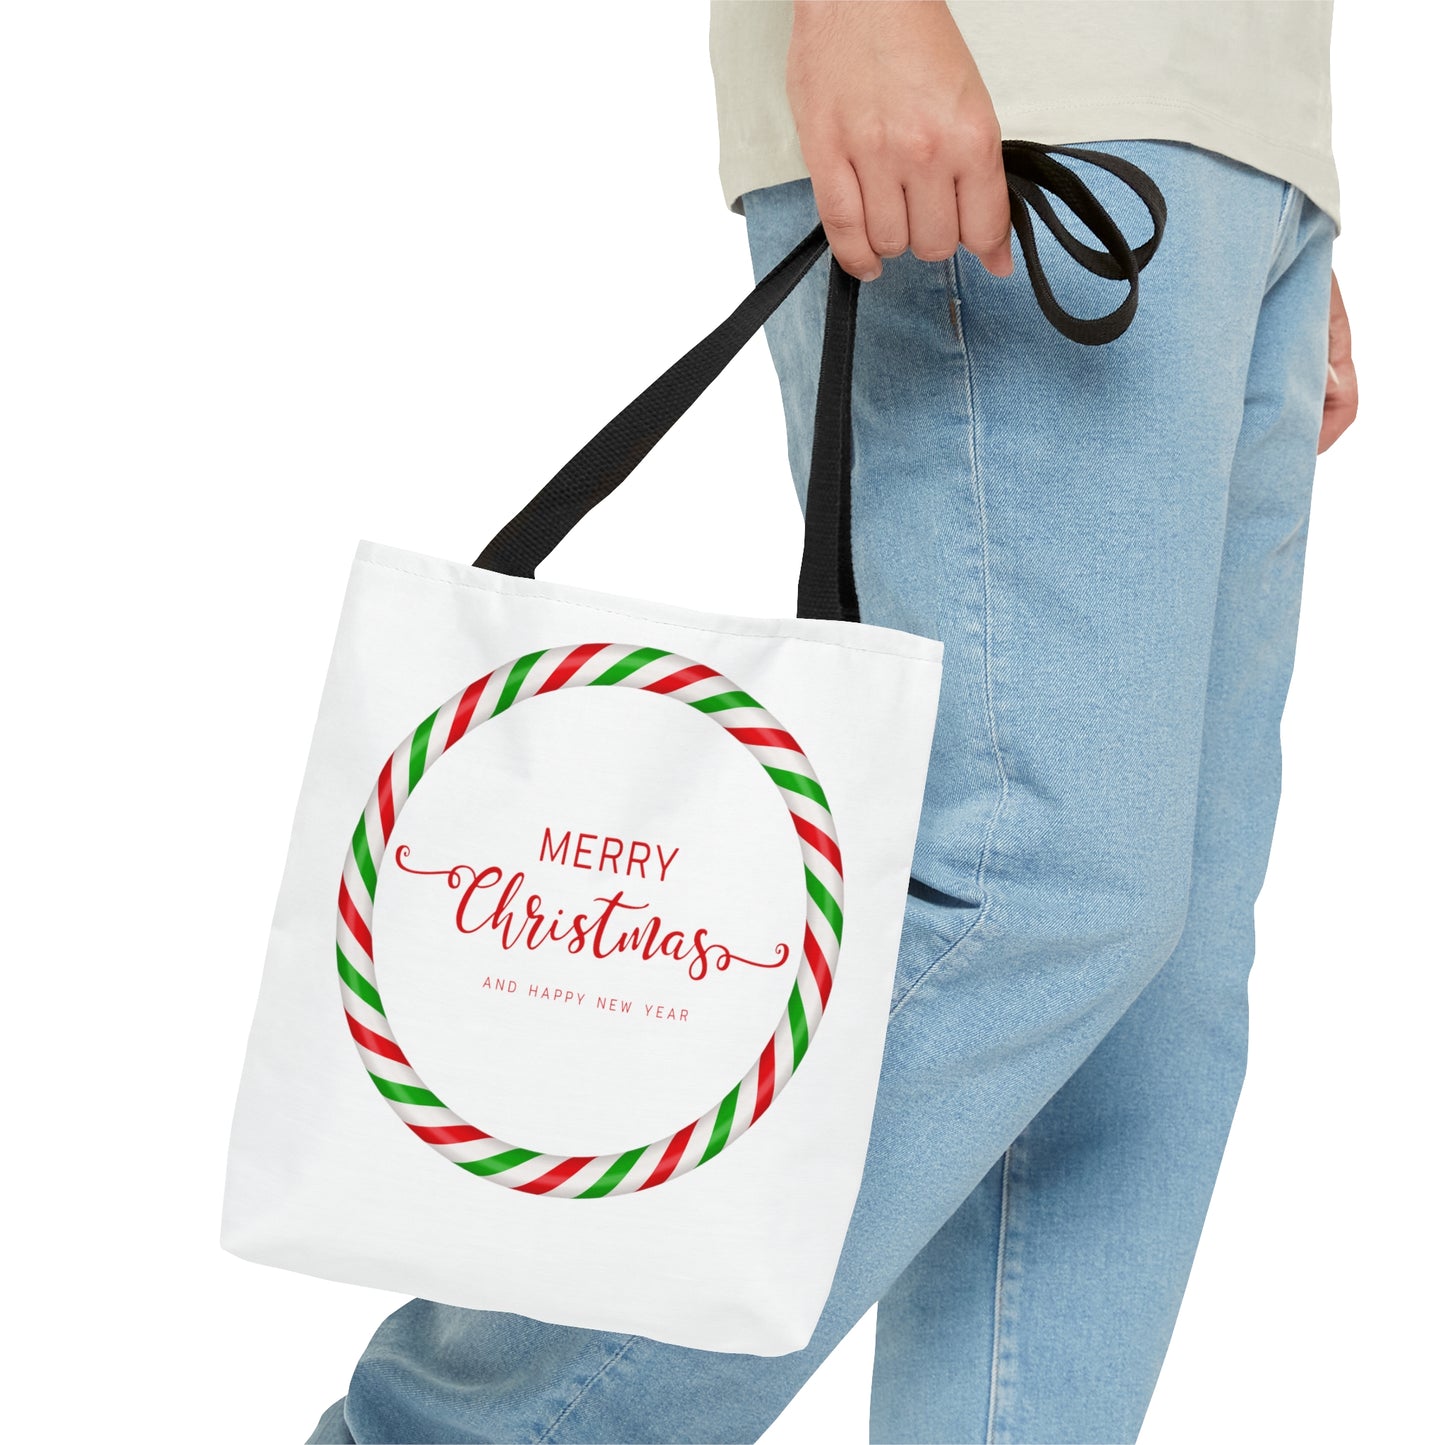 Merry Christmas Printed Tote Bag for Her & Him